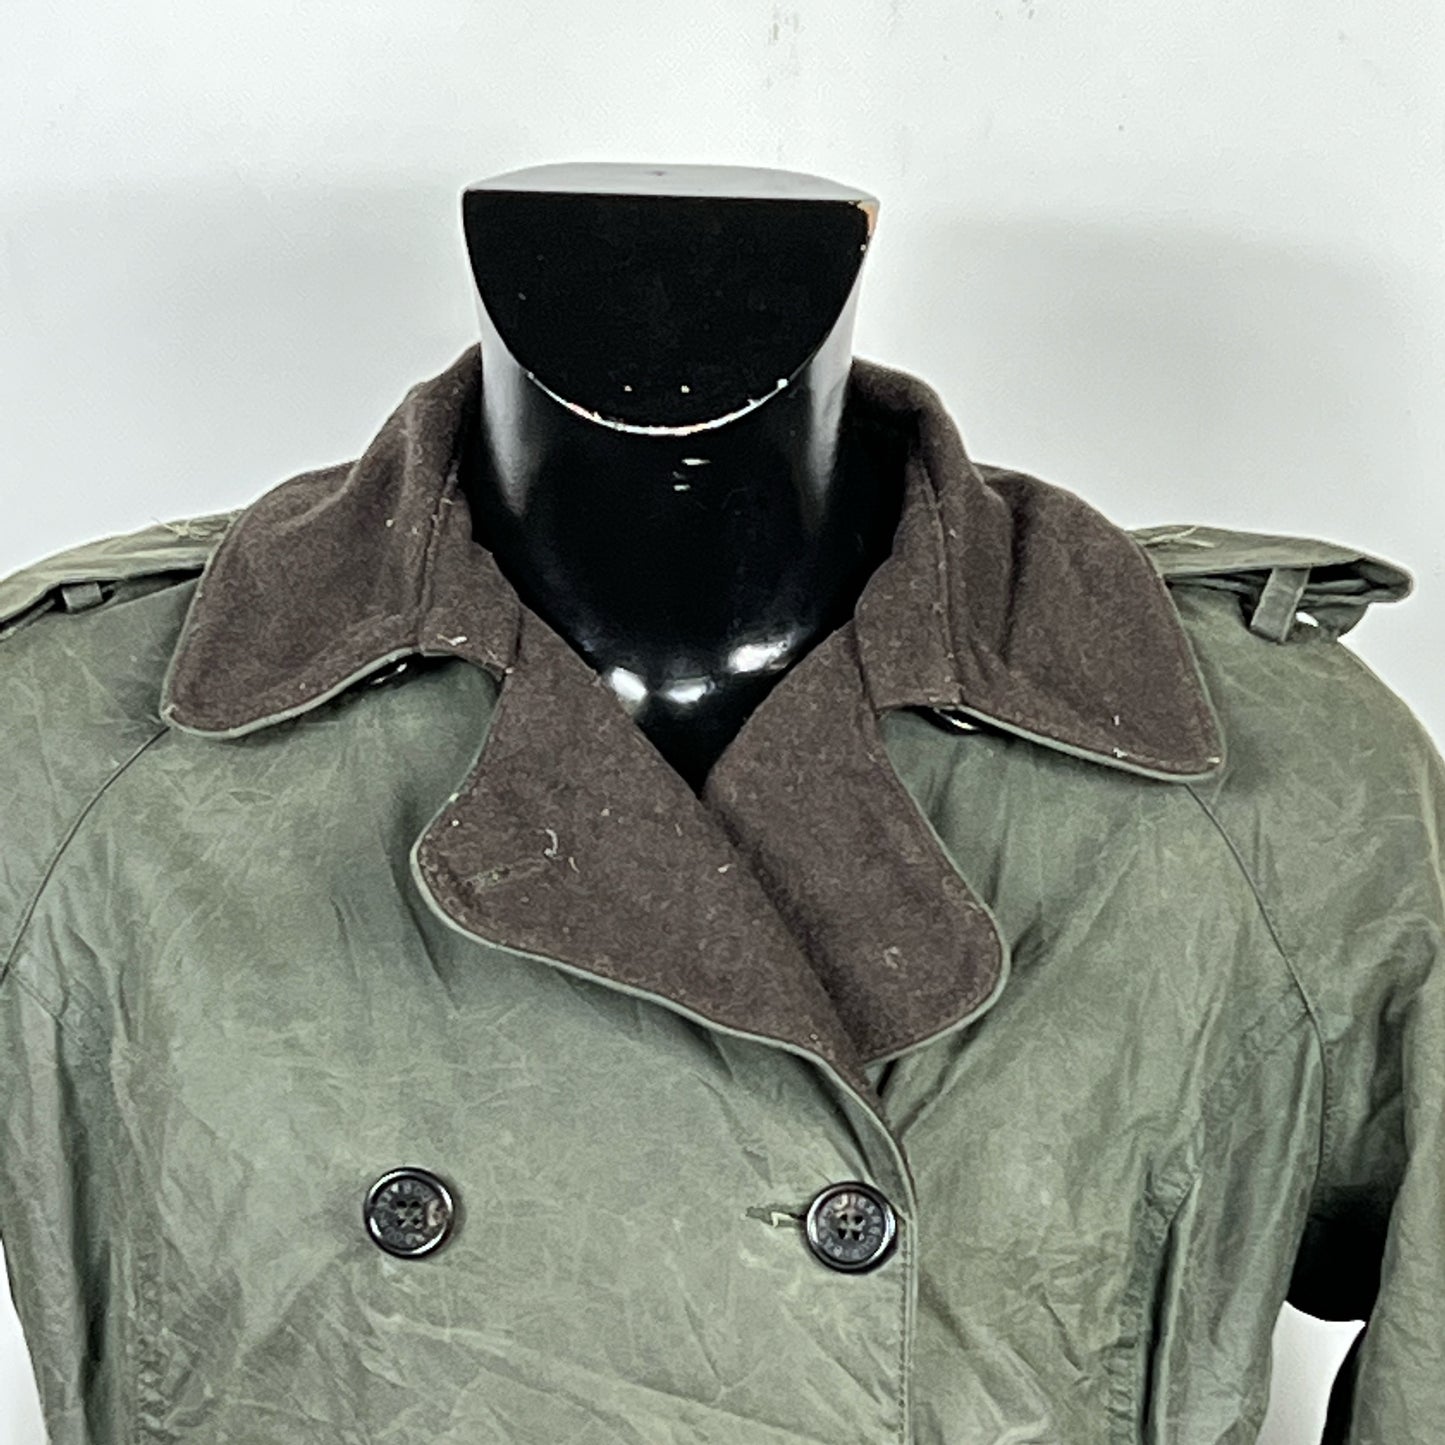 Cappotto Barbour verde modello Valerie Trench tg. 44 UK14- Lady Green wax coat